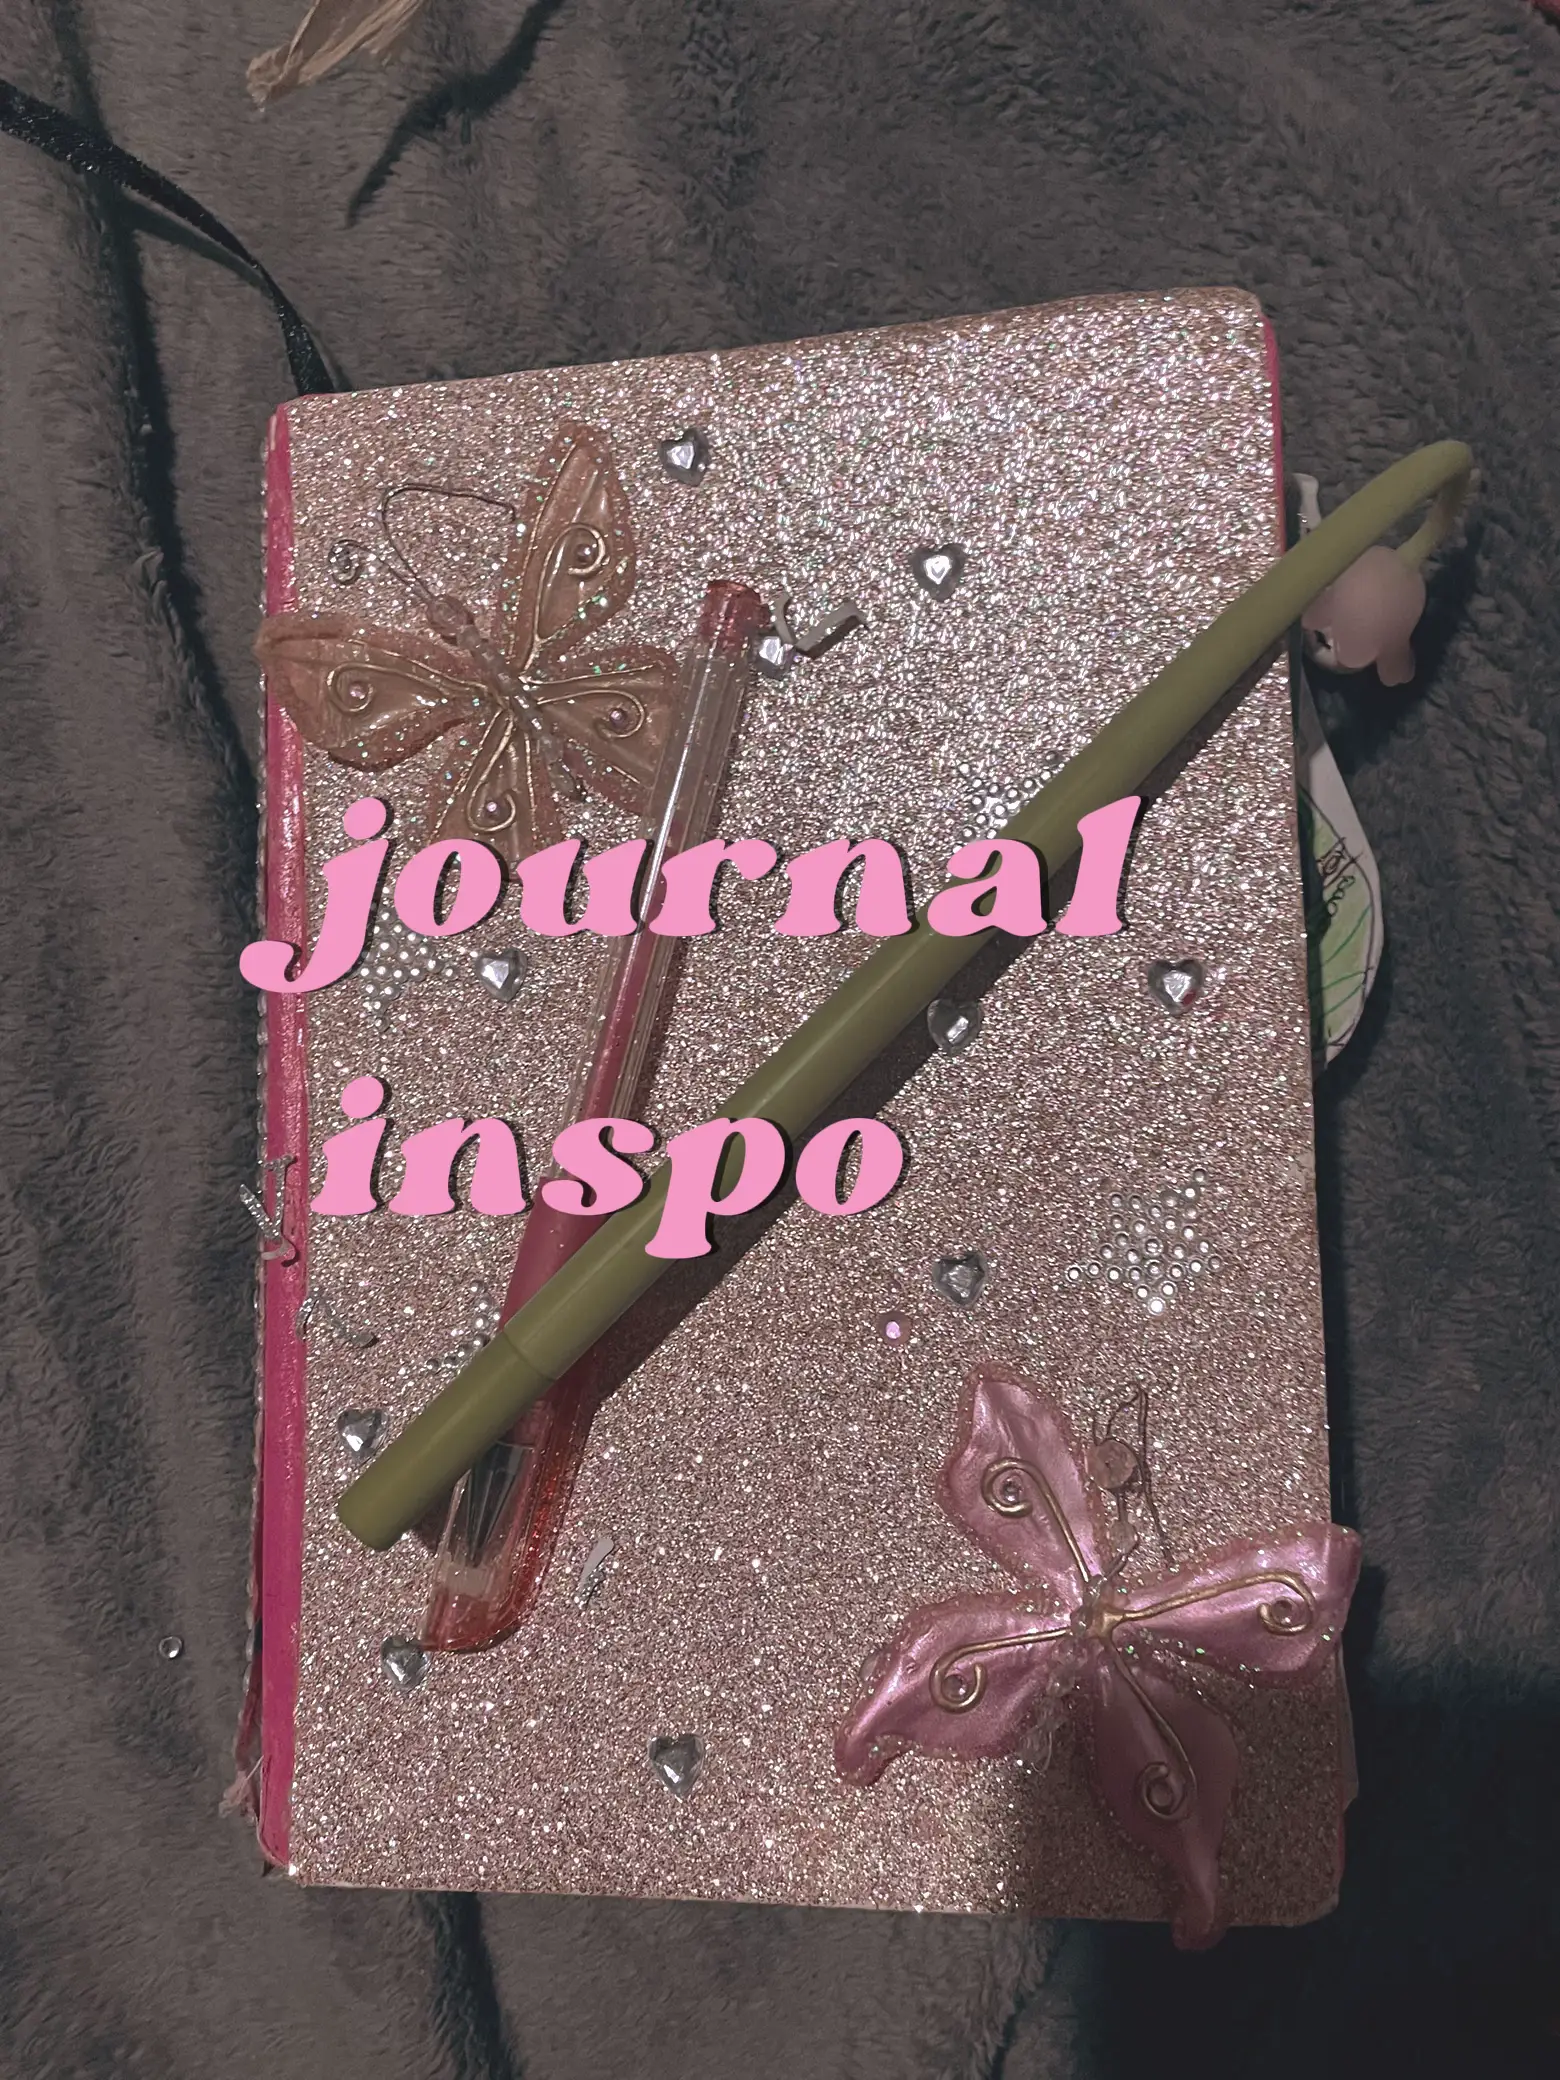 this turned out kinda cute #journaling #journal #aesthetic #coquette #